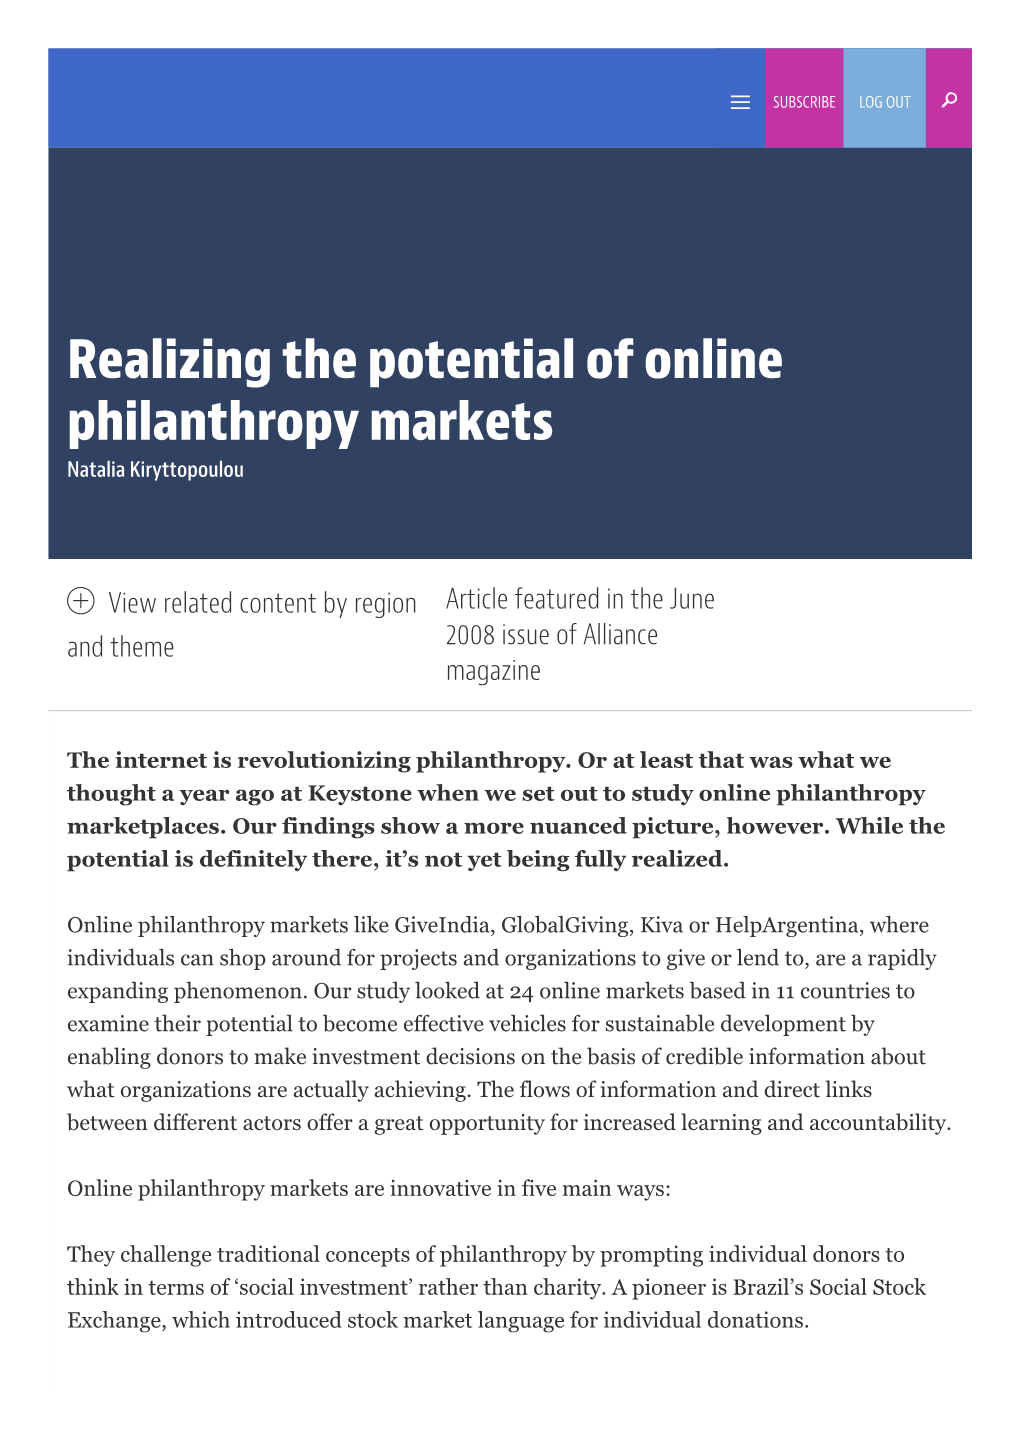 The Internet Is Revolutionizing Philanthropy. Or at Least That Was What We Thought a Year Ago at Keystone When We Set out to Study Online Philanthropy Marketplaces